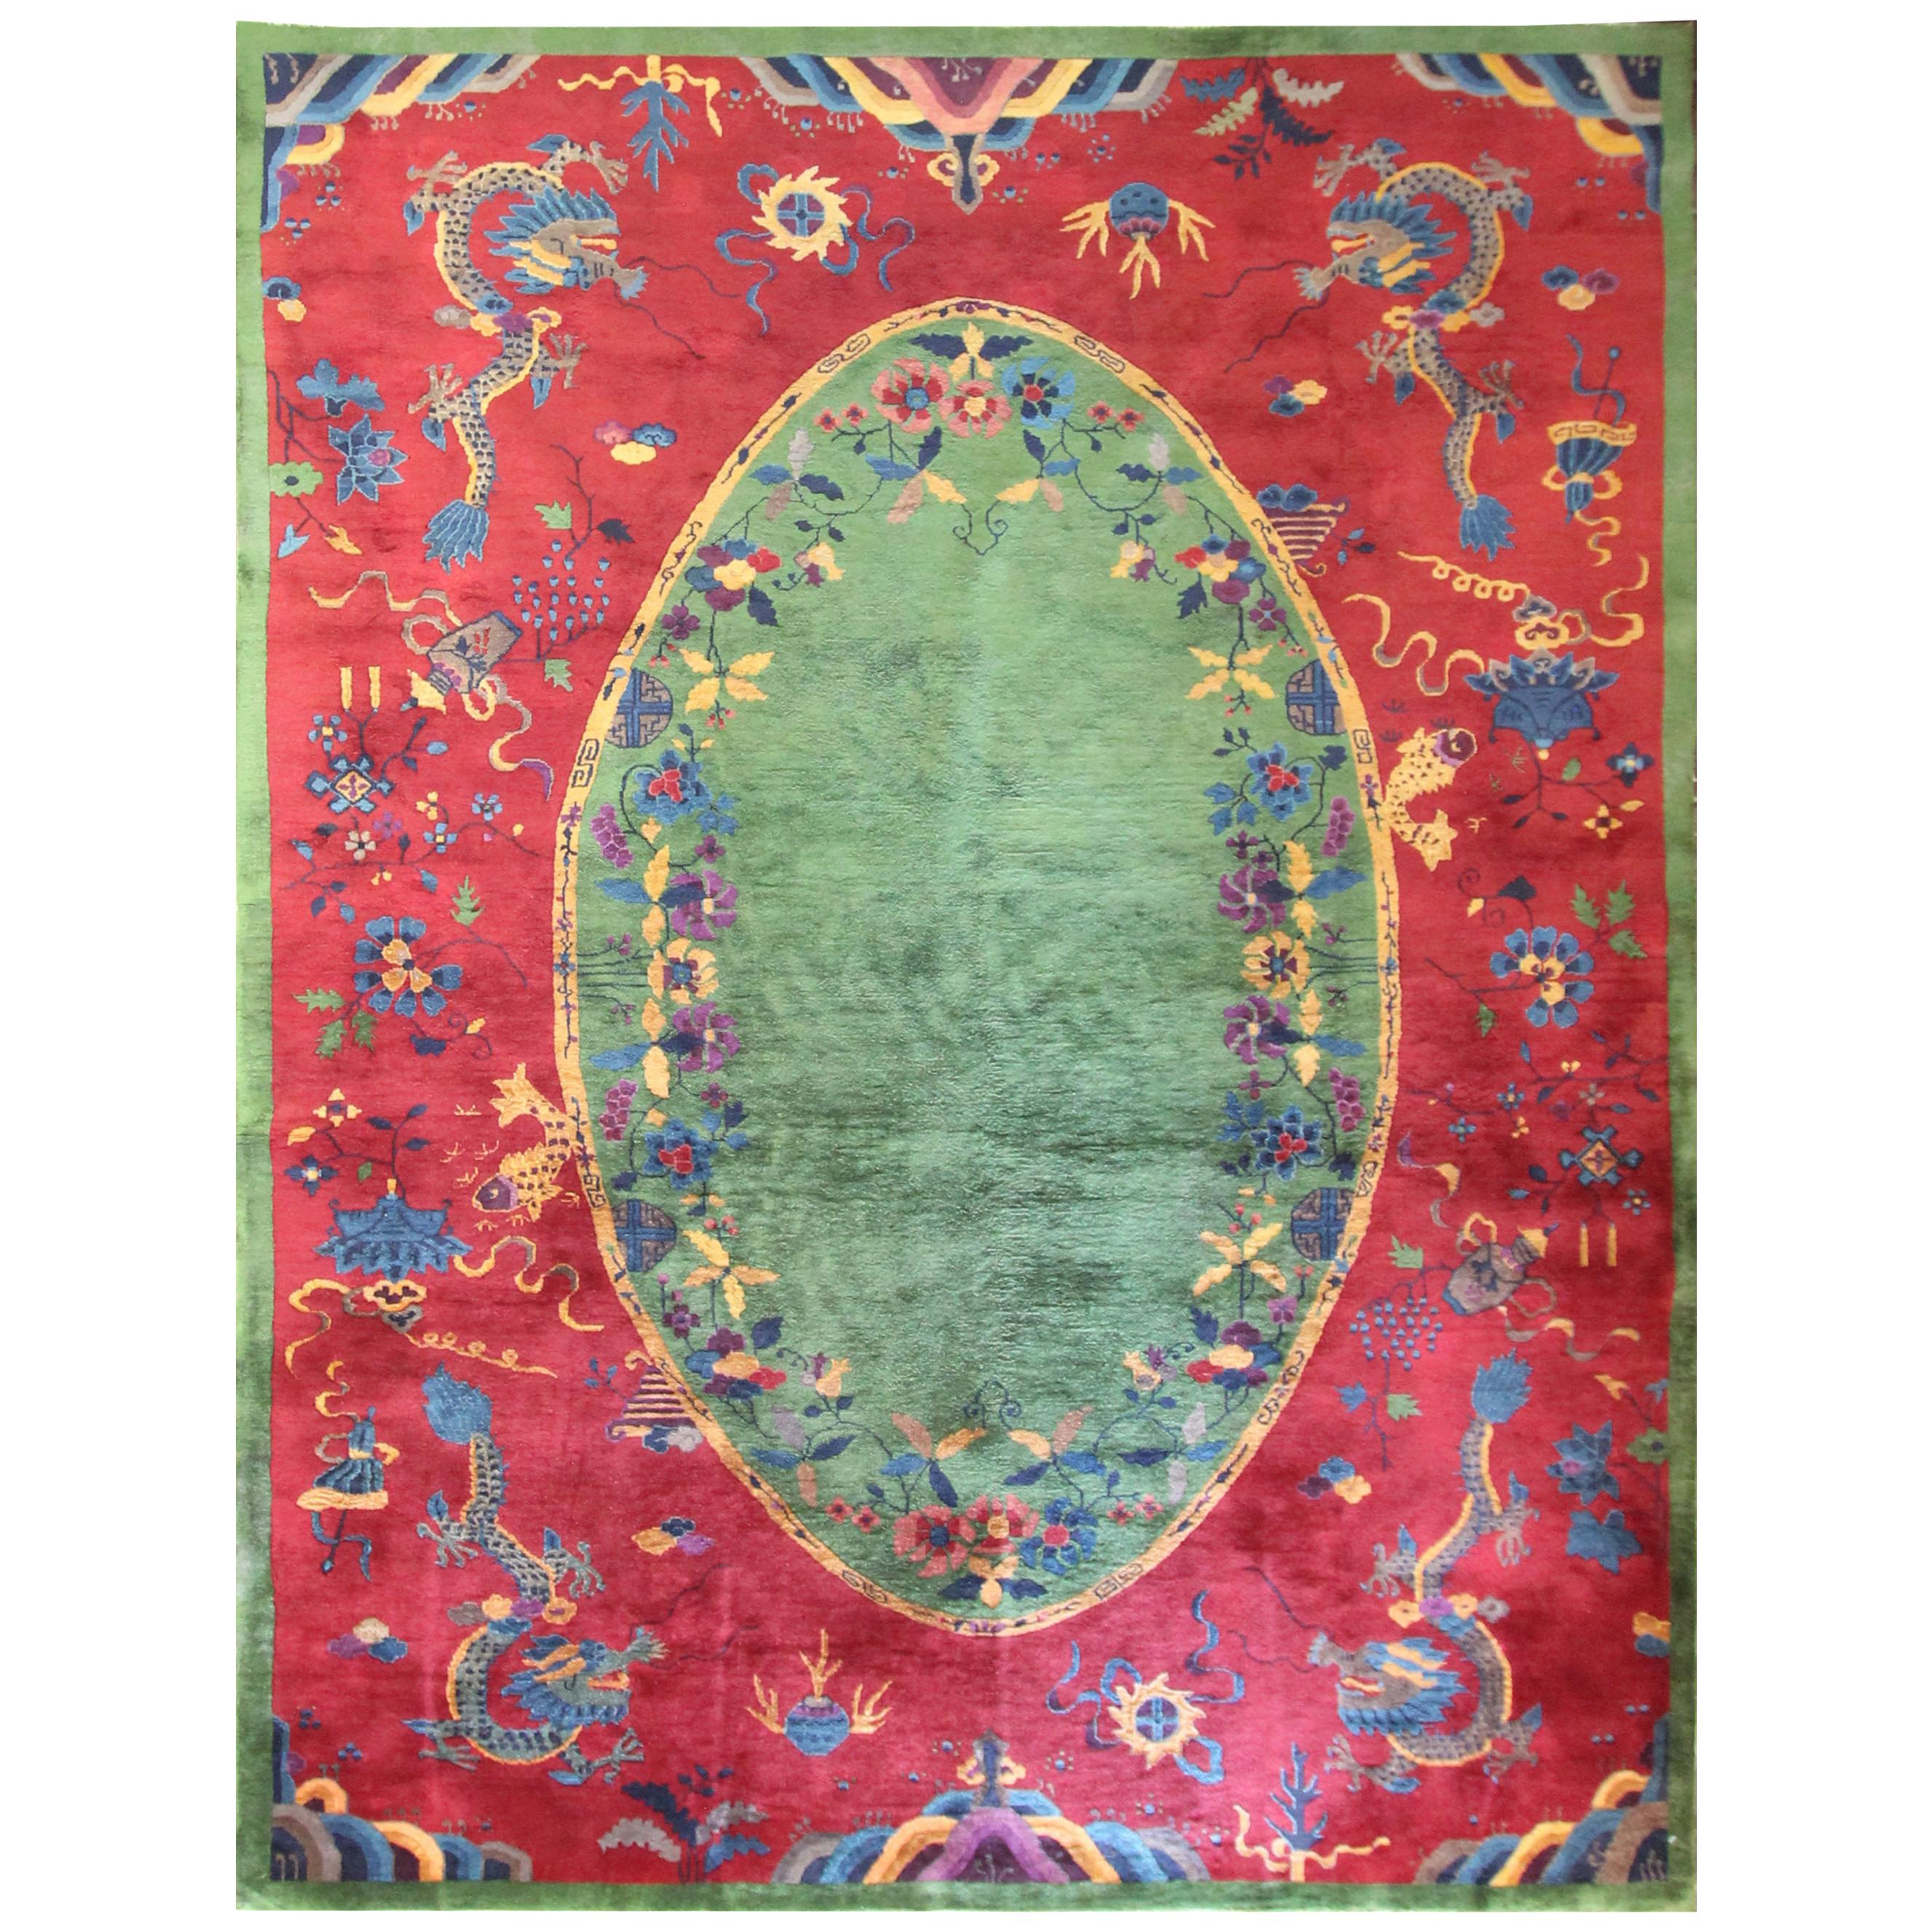 Antique Dragon Art Deco Chinese Carpet, Early 20th Century, 8'9" x 11'6"